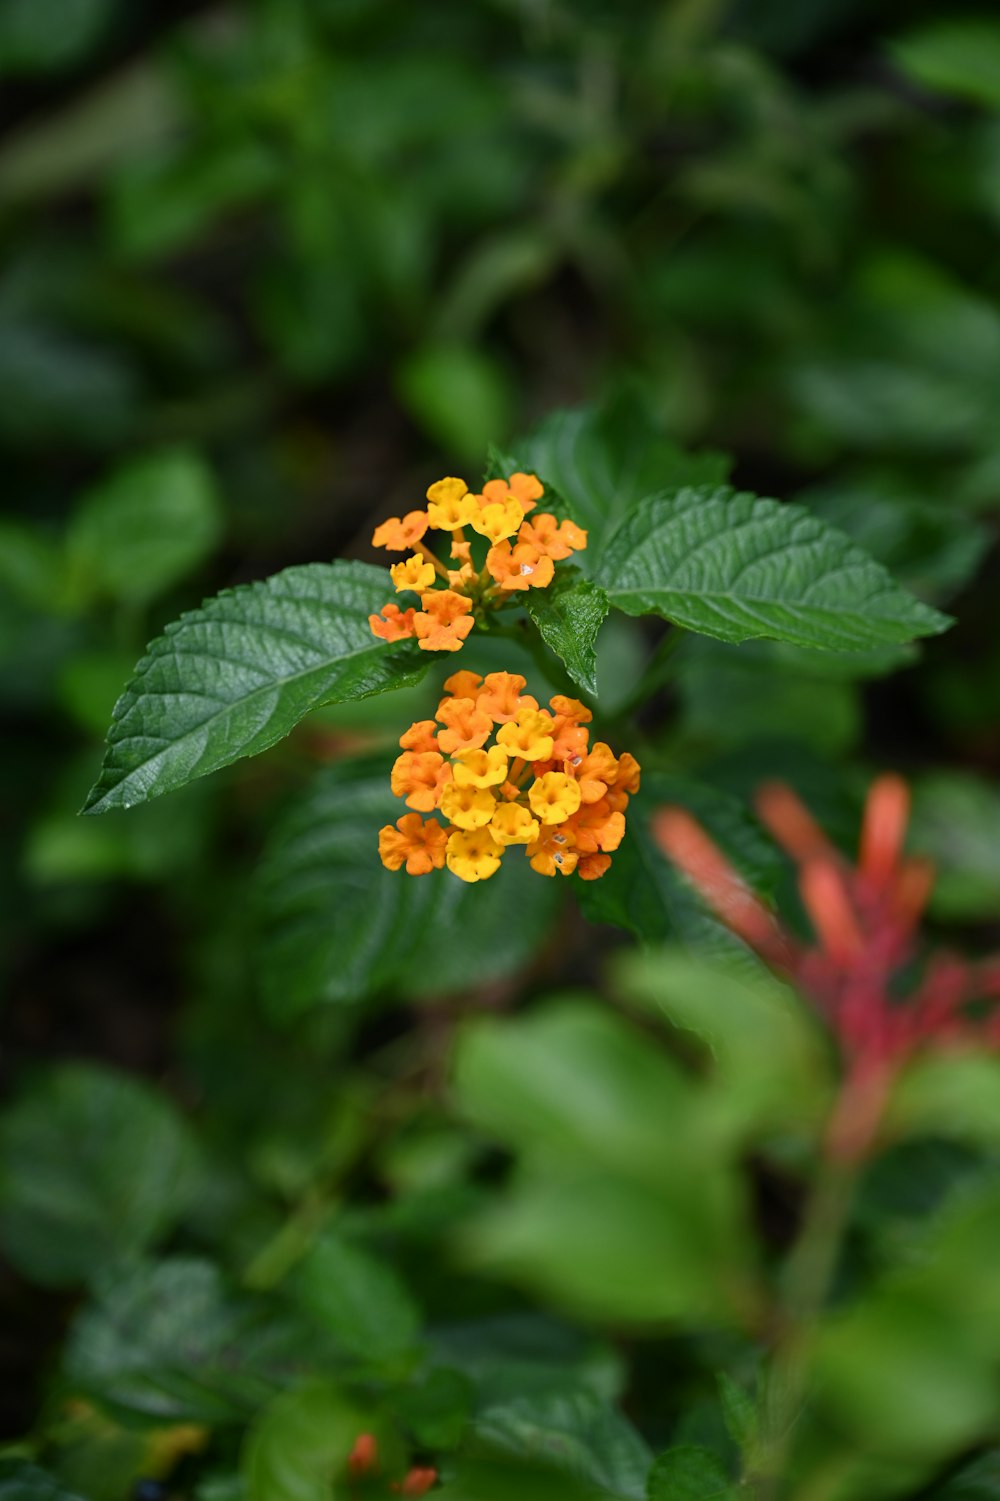 a small orange and yellow flower with green leaves